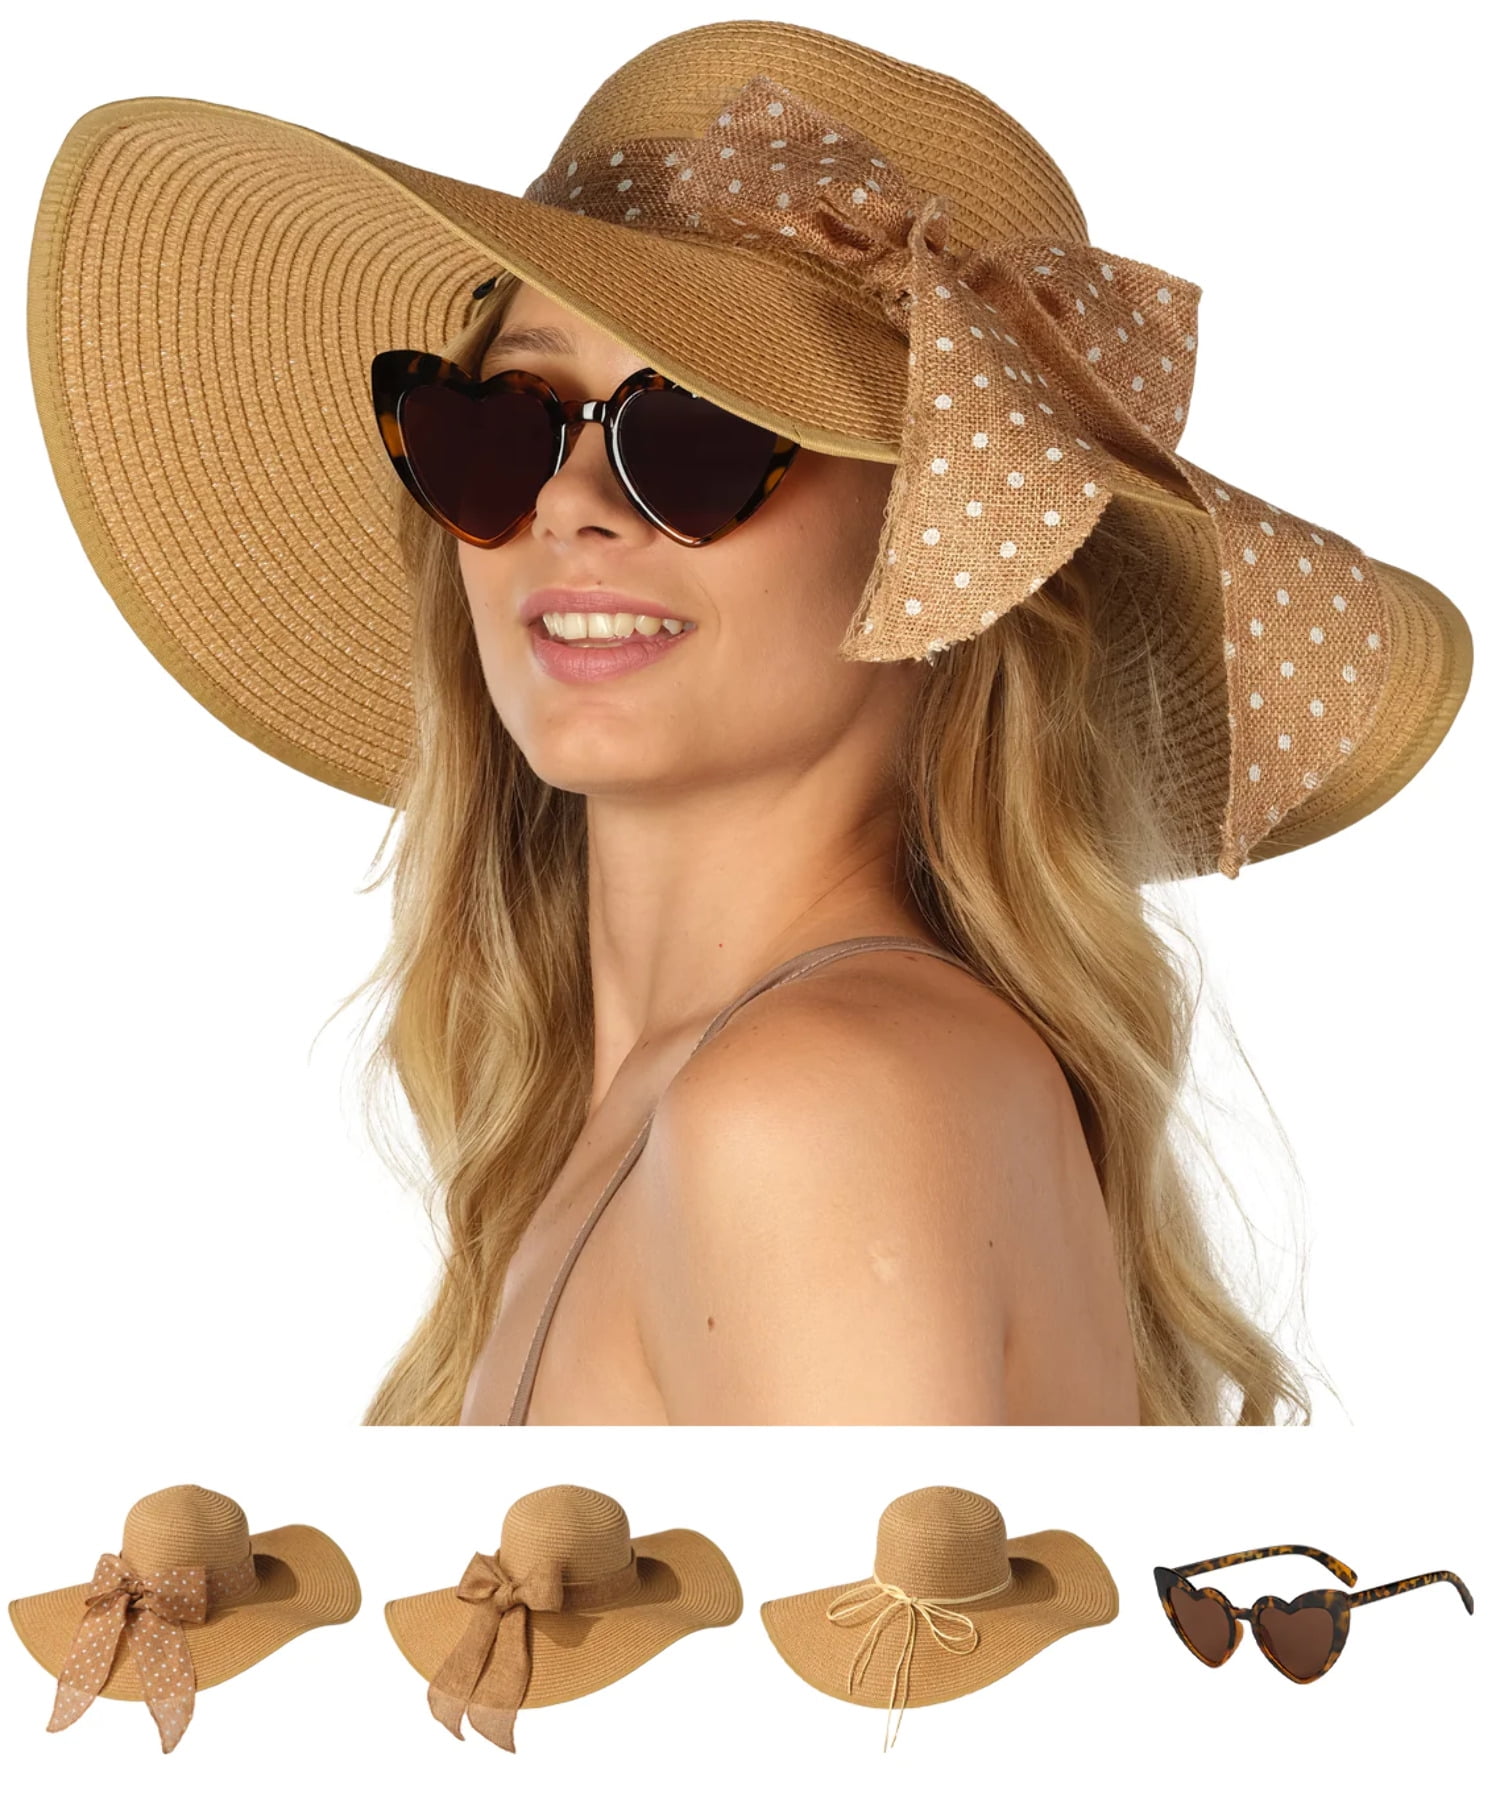 FUNCREDIBLE Wide Brim Sun Hats for Women - Floppy Straw Hat with